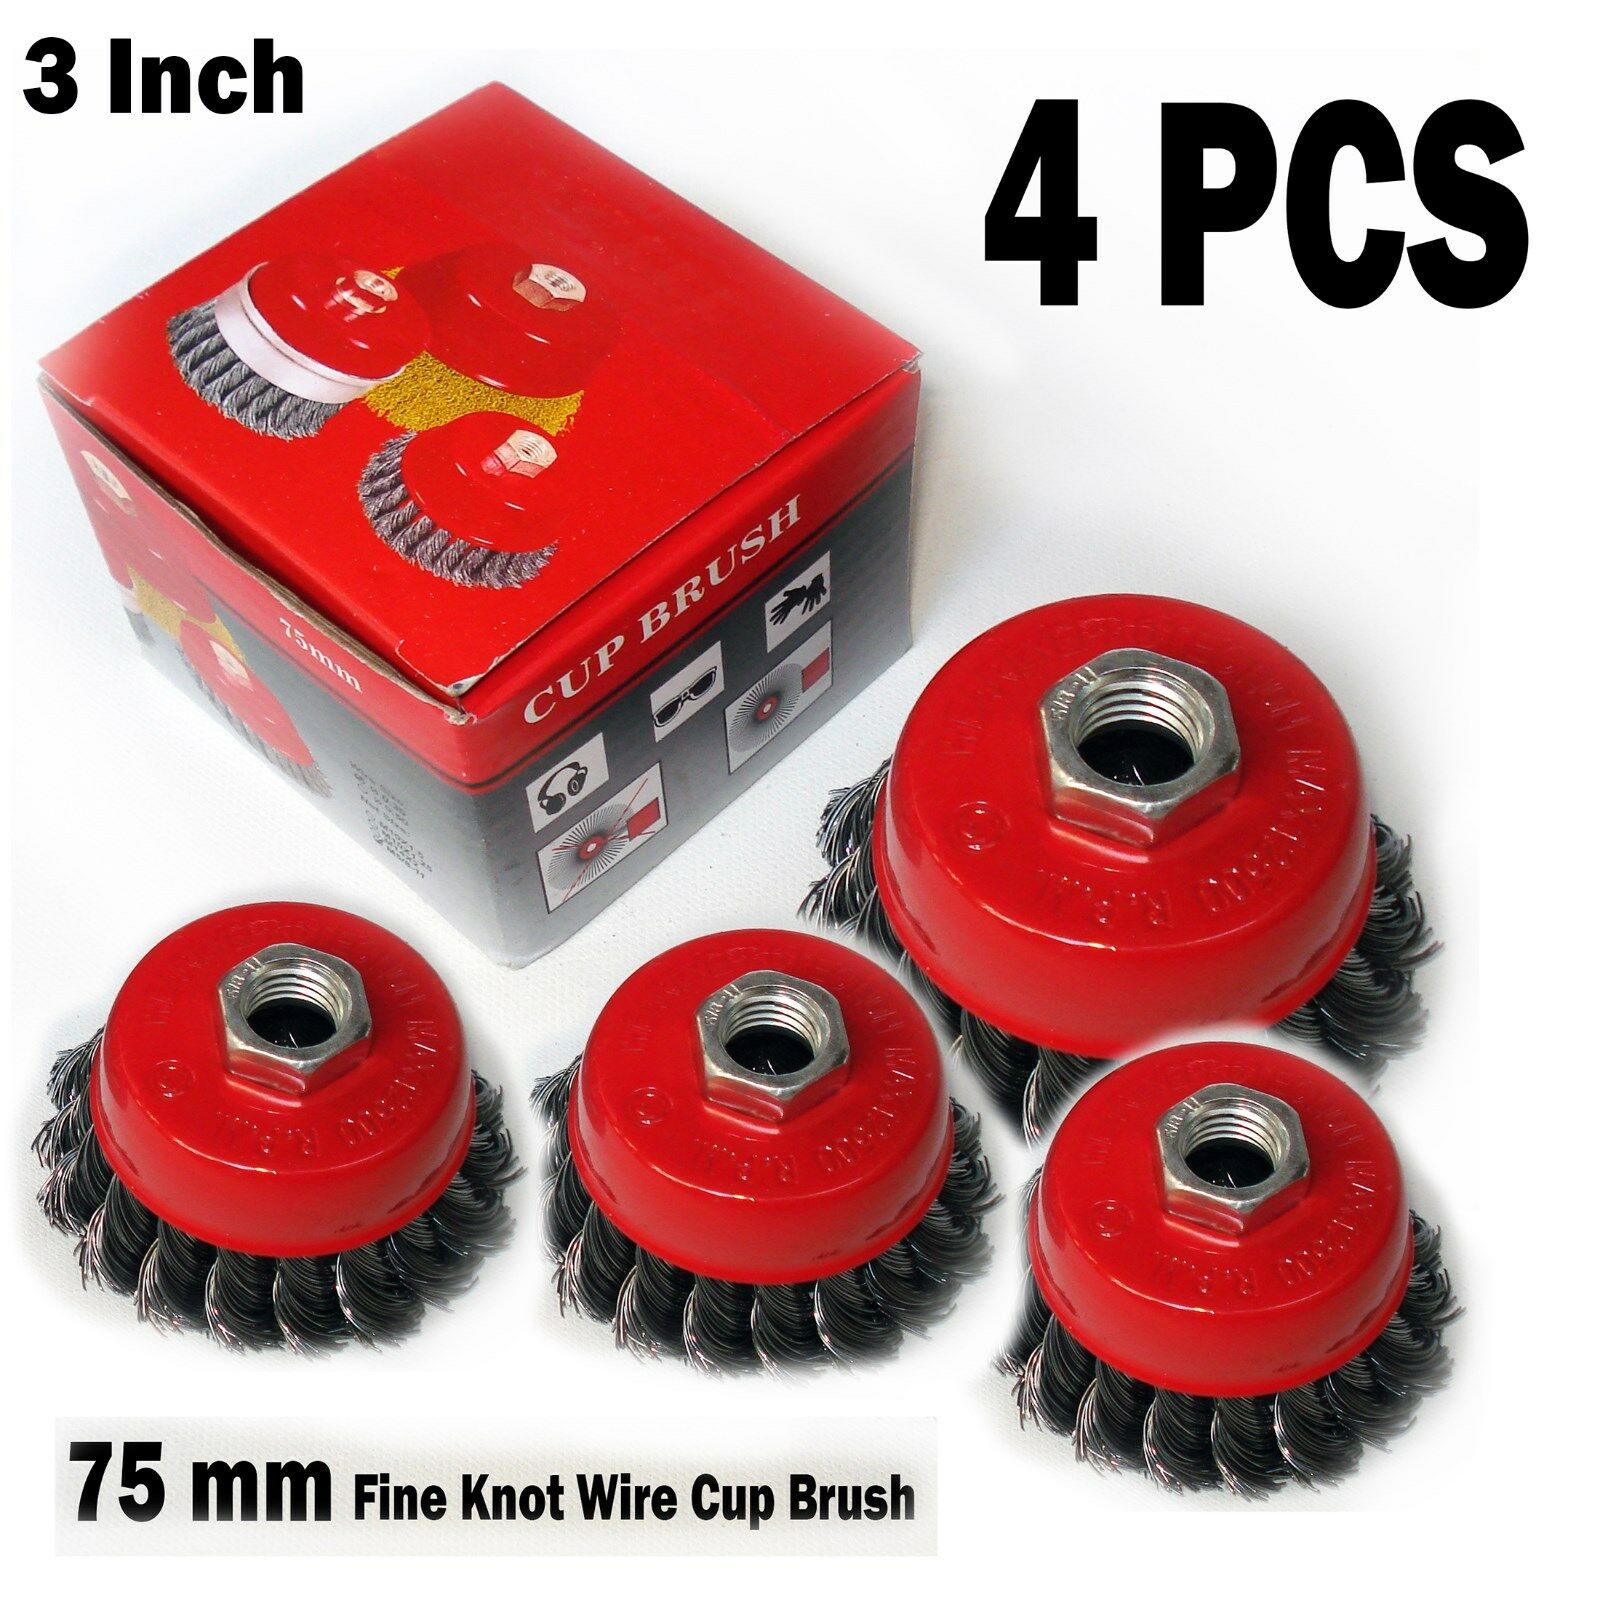 4 Pcs  3" X 5/8" 11 Nc Fine Knot Wire Cup Brush Twist - For Angle Grinders Wheel